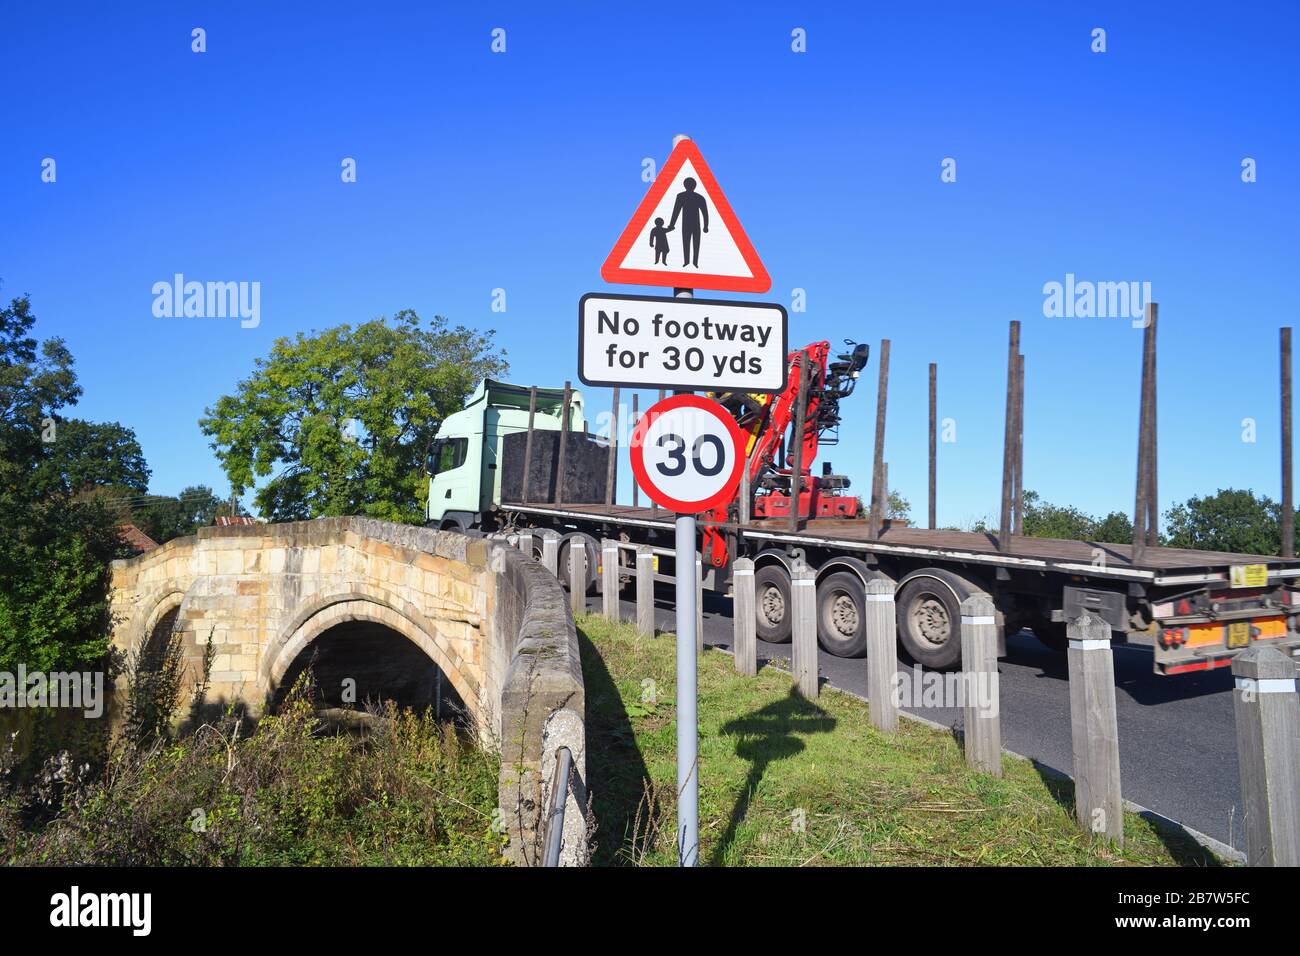 lorry passing no footway for pedestrians in road ahead warning sign on bridge crossing the river derwent at sutton on derwent united kingdom Stock Photo